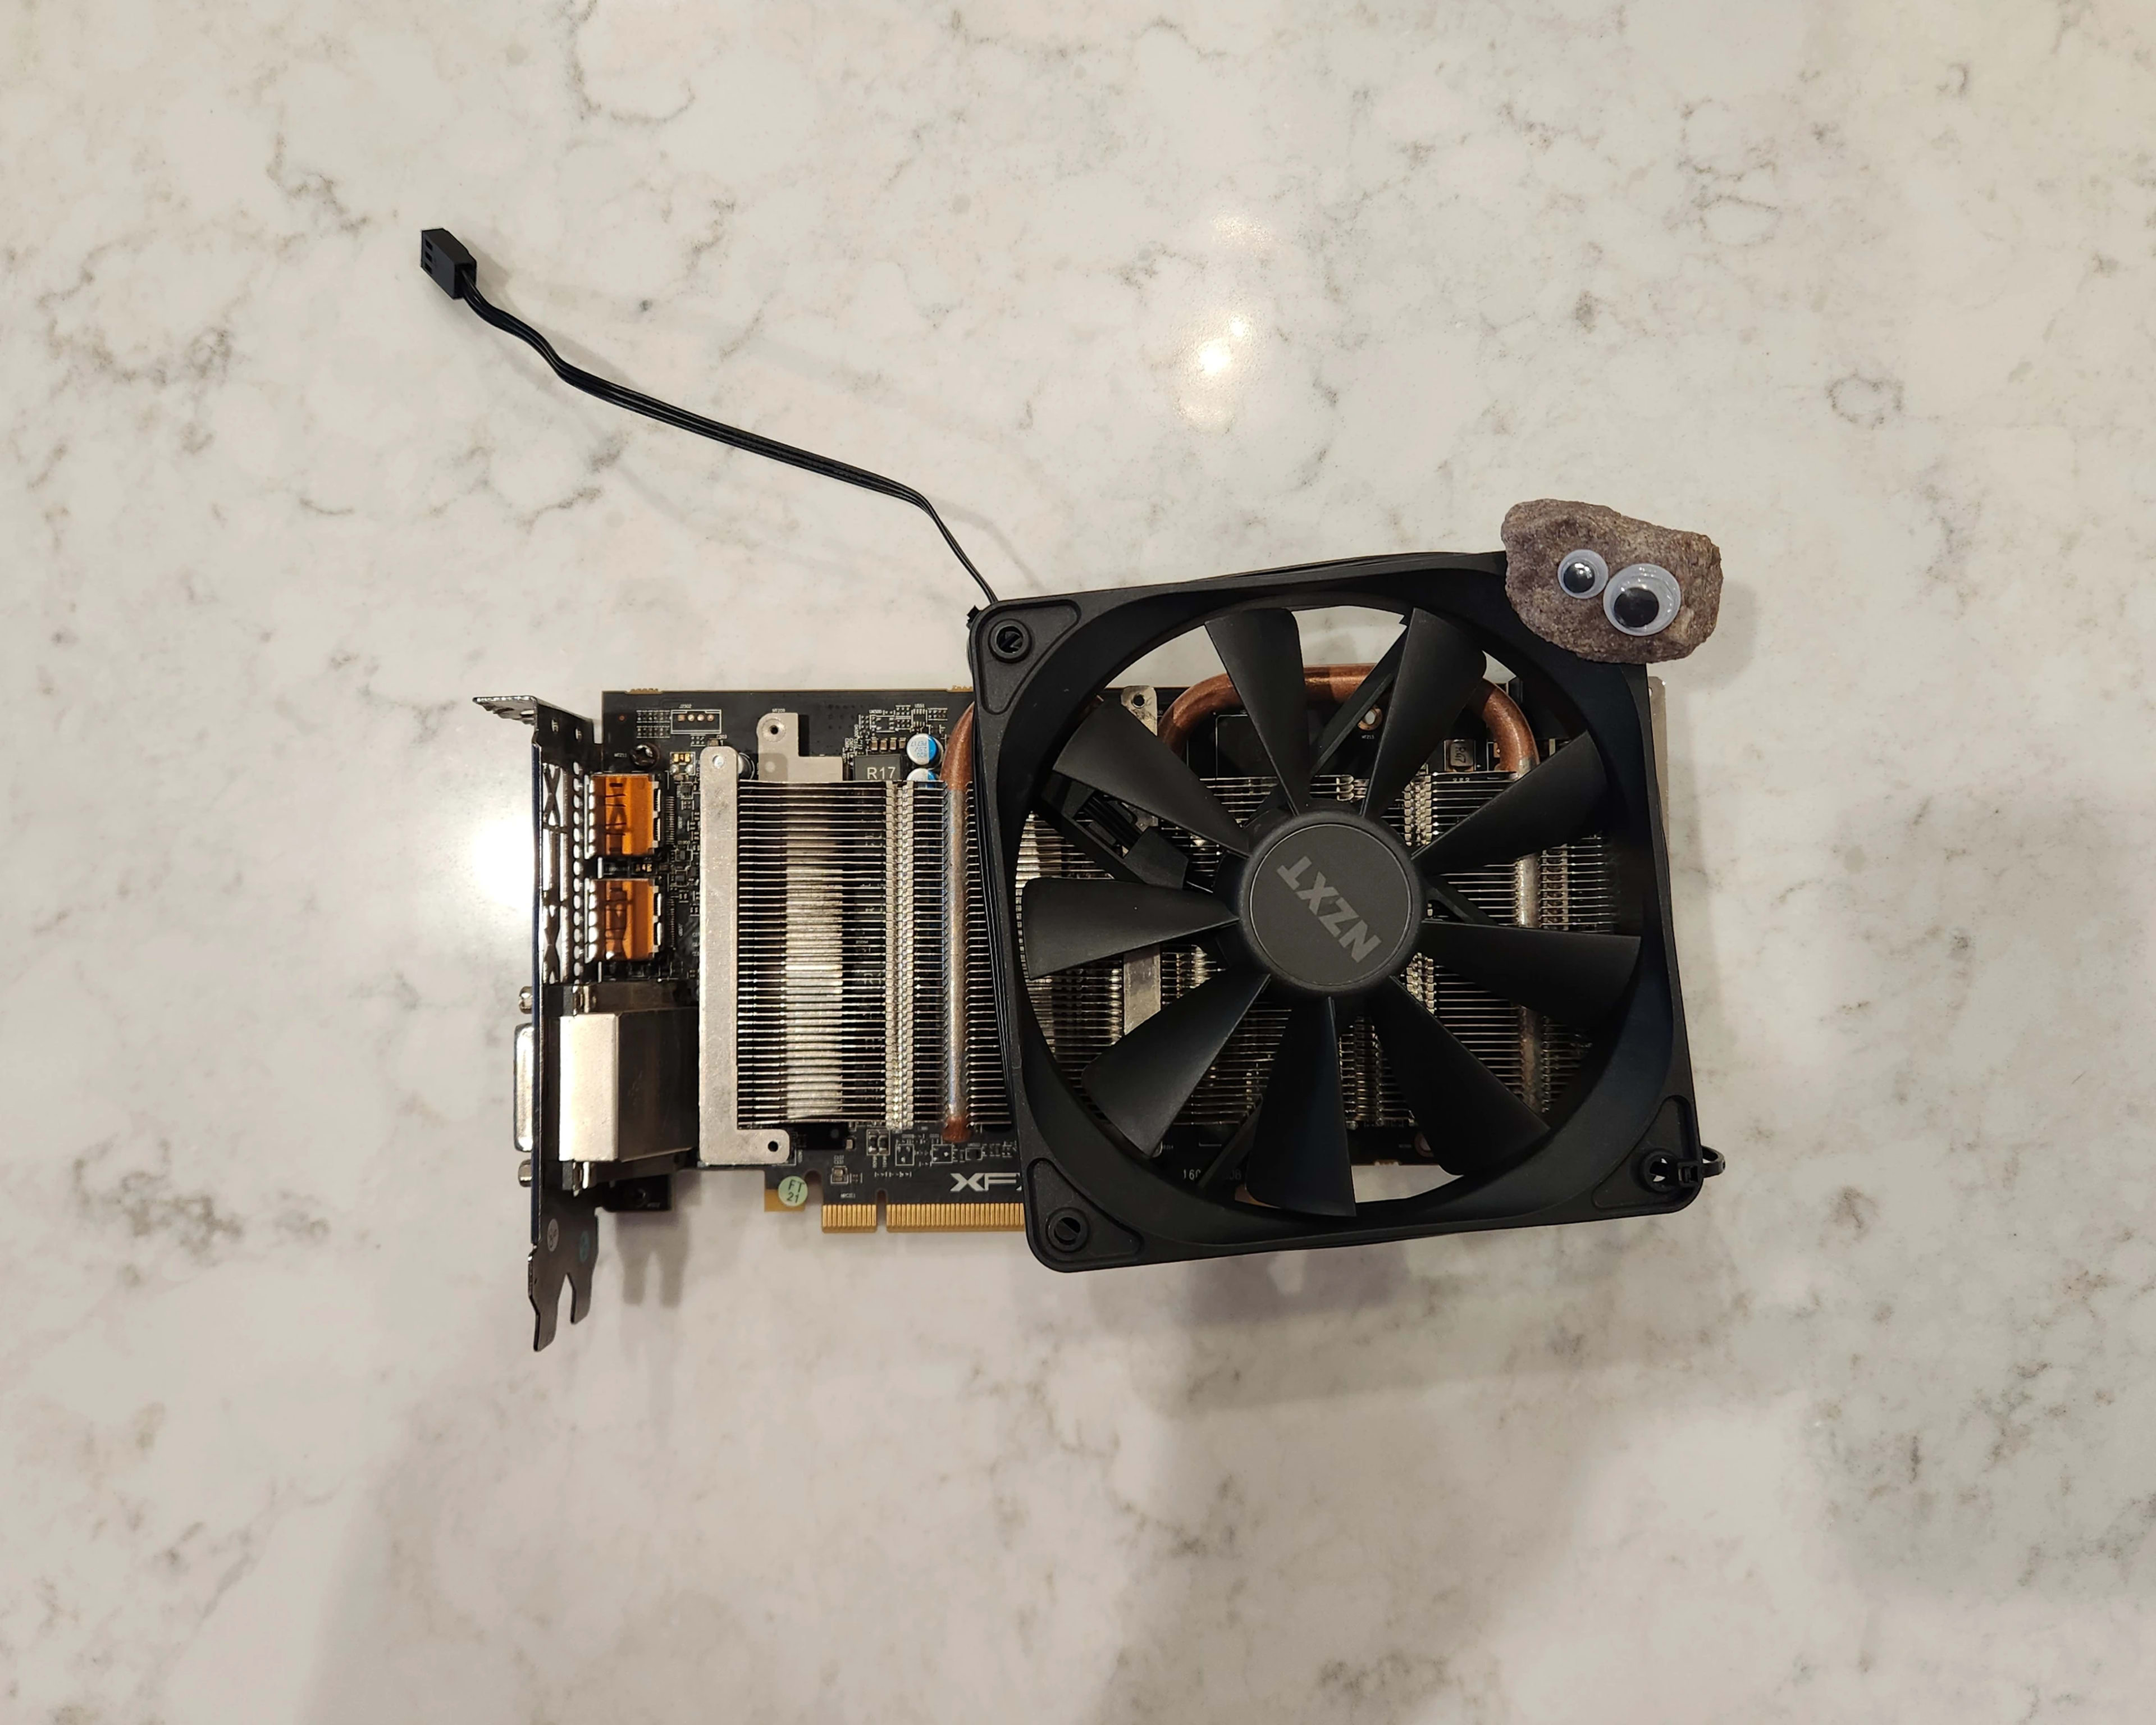 **READ** RX 470 4GB (XFX Passive Cooler) w/ 120mm case fan added - Working but AS-IS